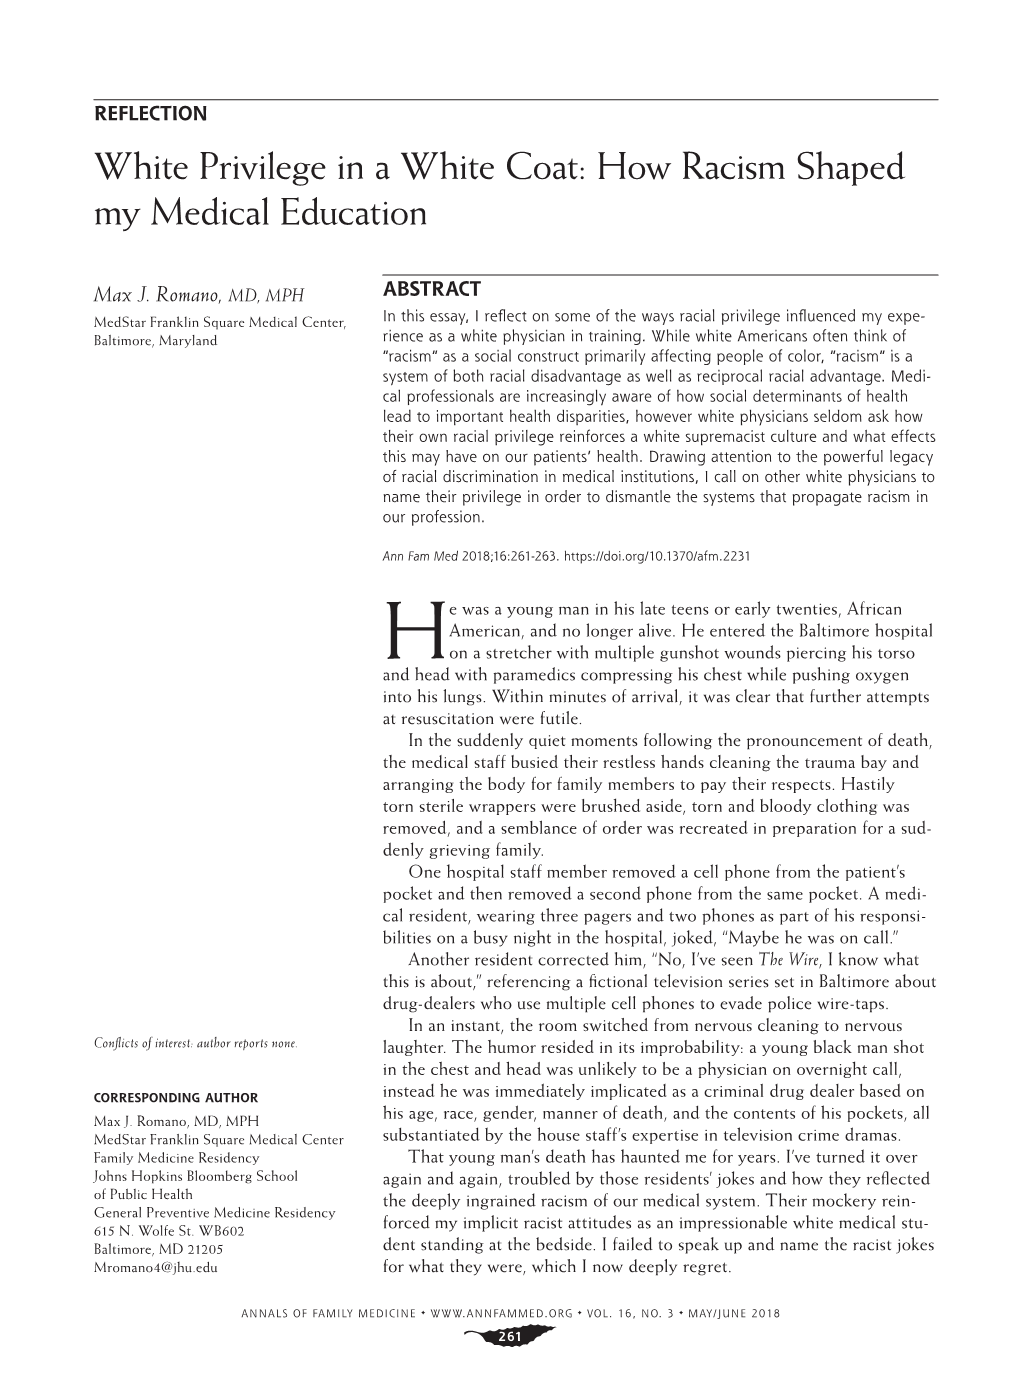 White Privilege in a White Coat: How Racism Shaped My Medical Education